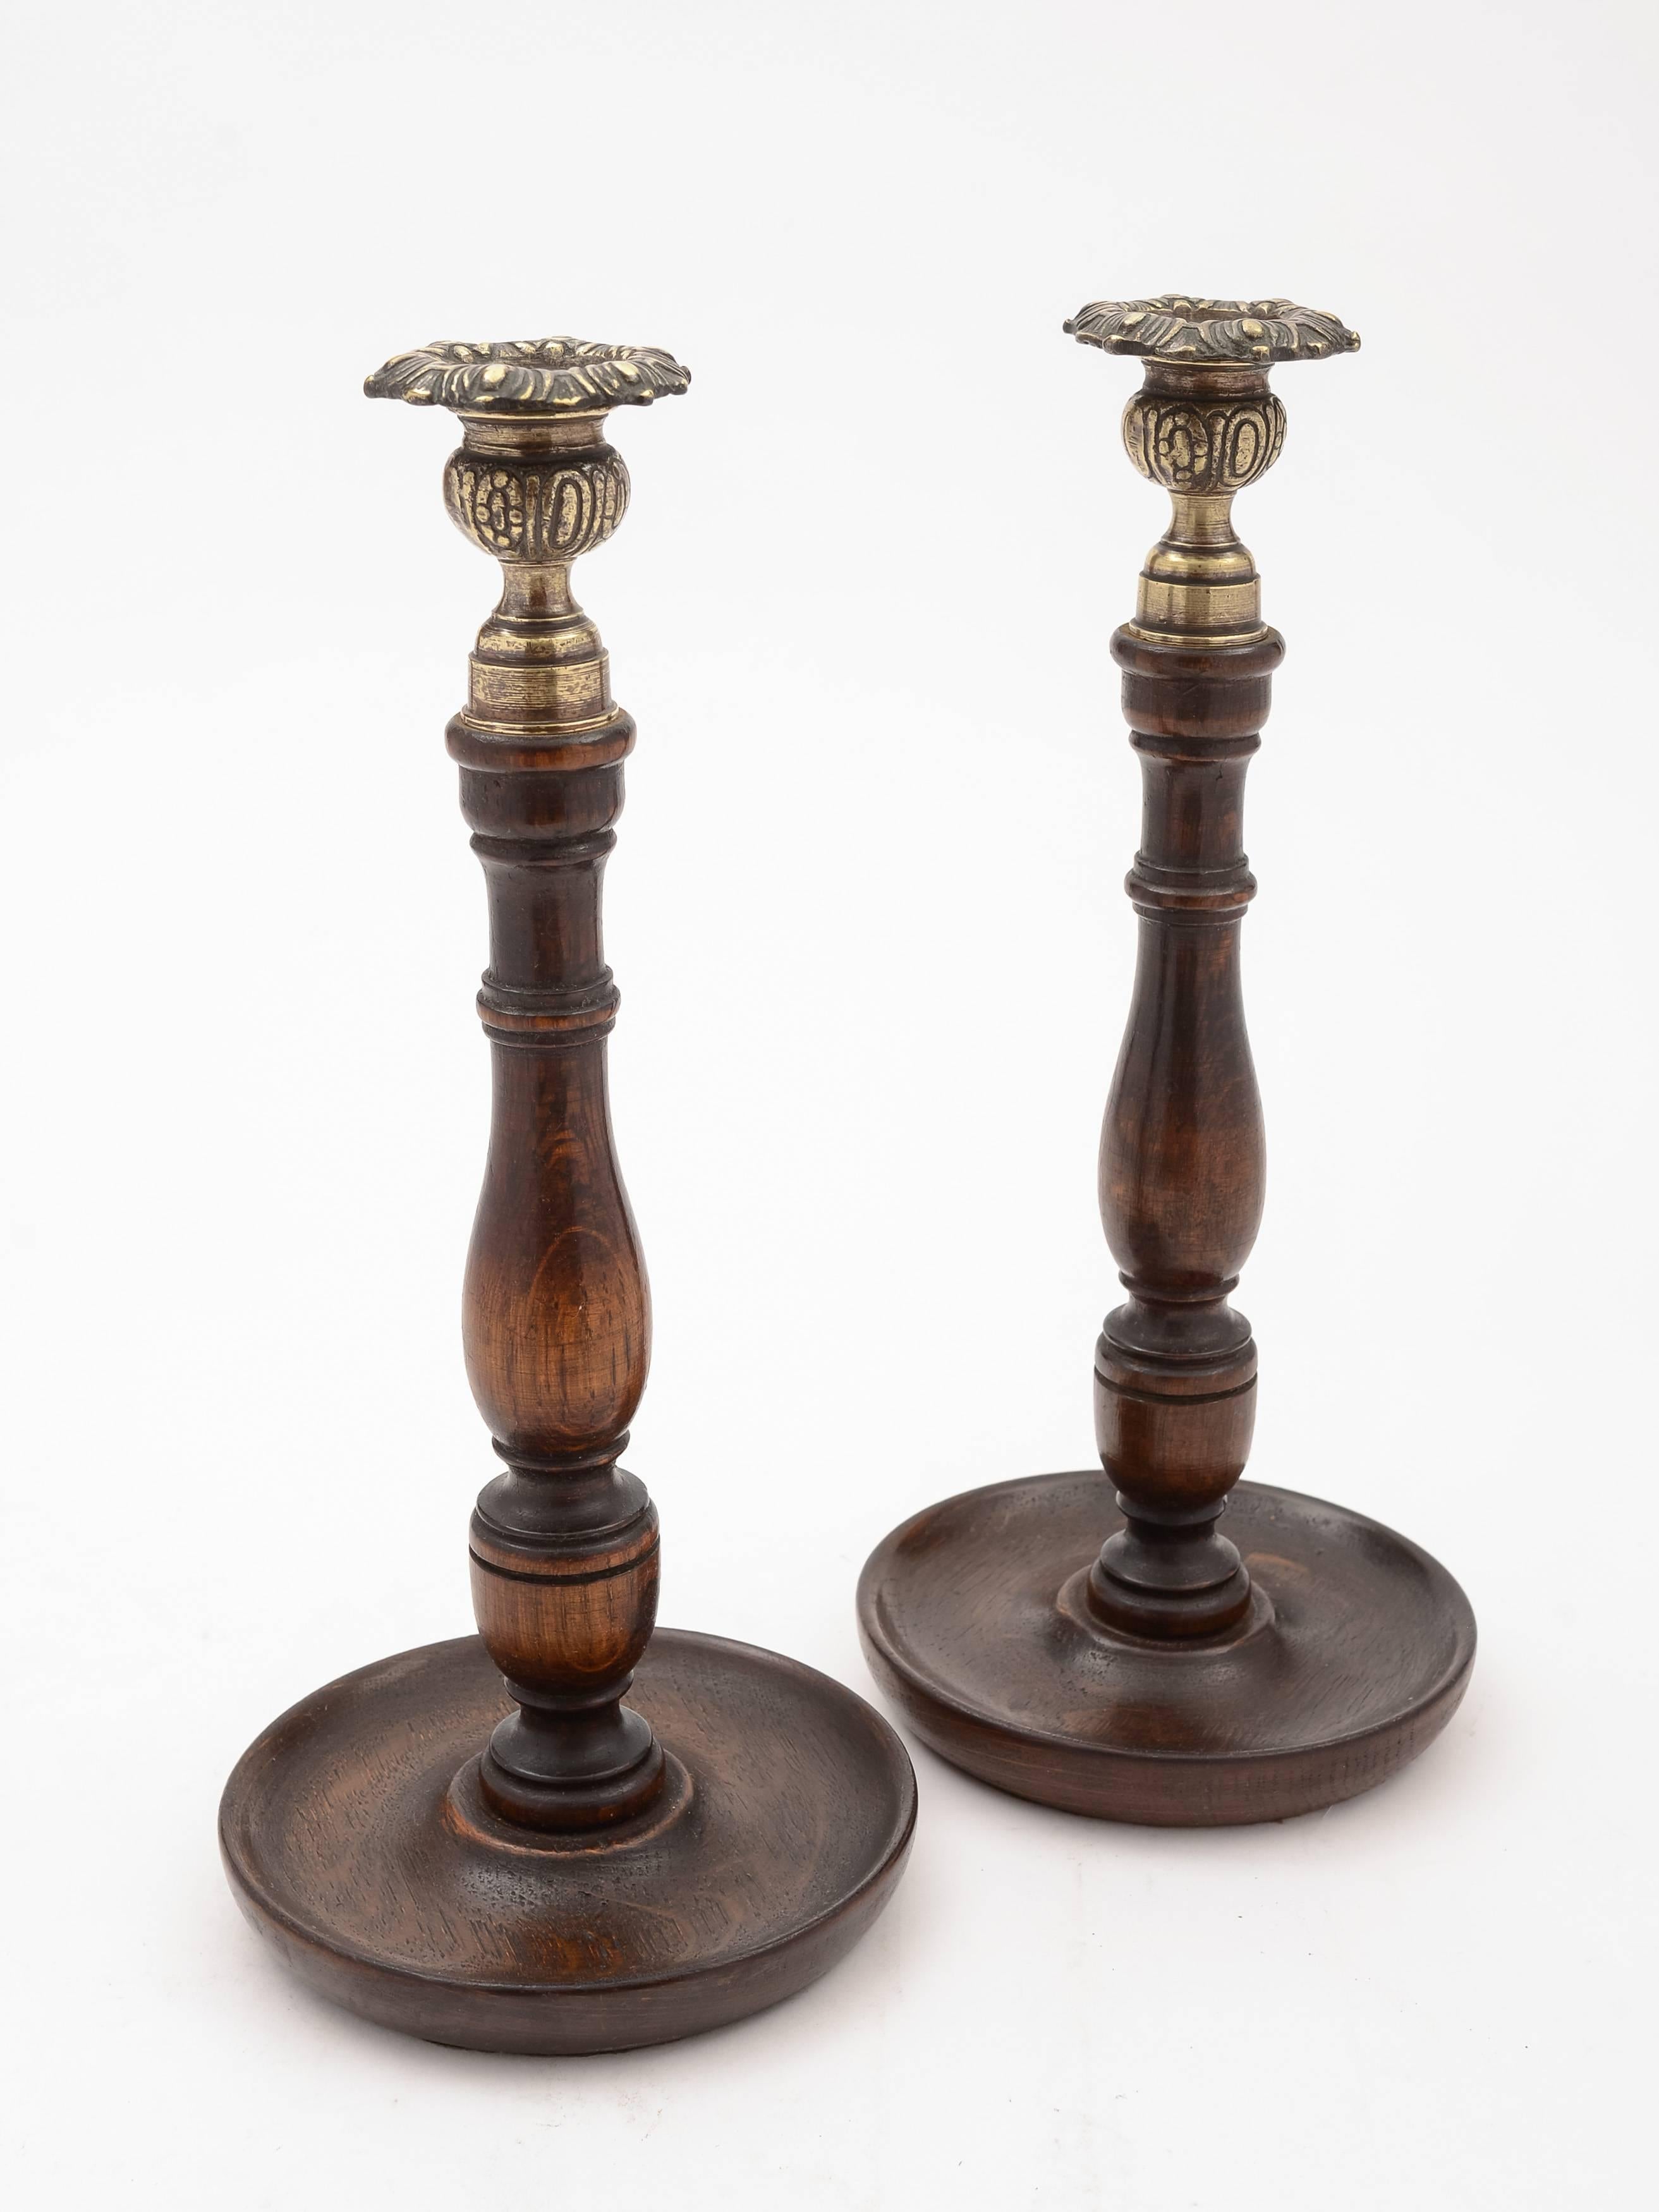 A good pair of English oak turned candlesticks with solid embossed brass tops and drip trays, circa 1920.

  

Measurements:
Height 11 1/2